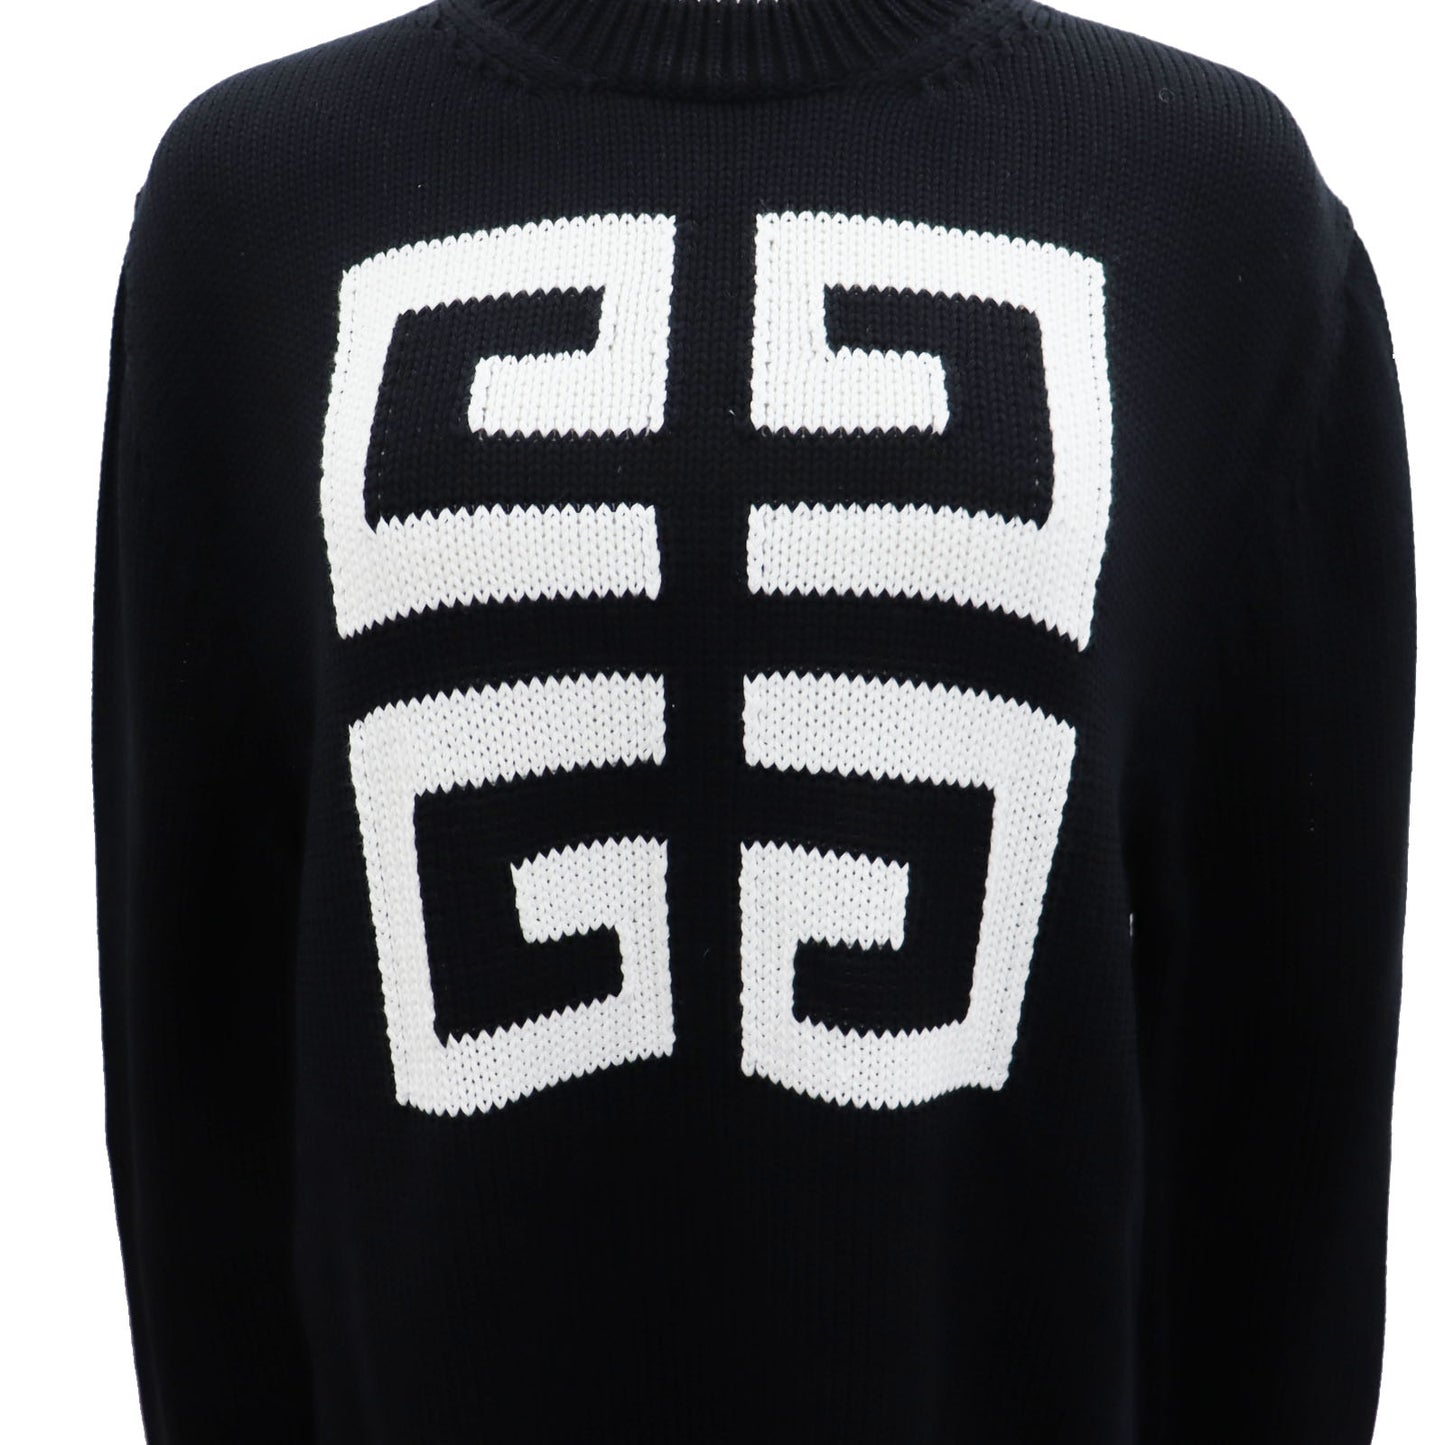 GIVENCHY Long Sleeve Knit Sweater Tops Black 100% Cotton #AH529